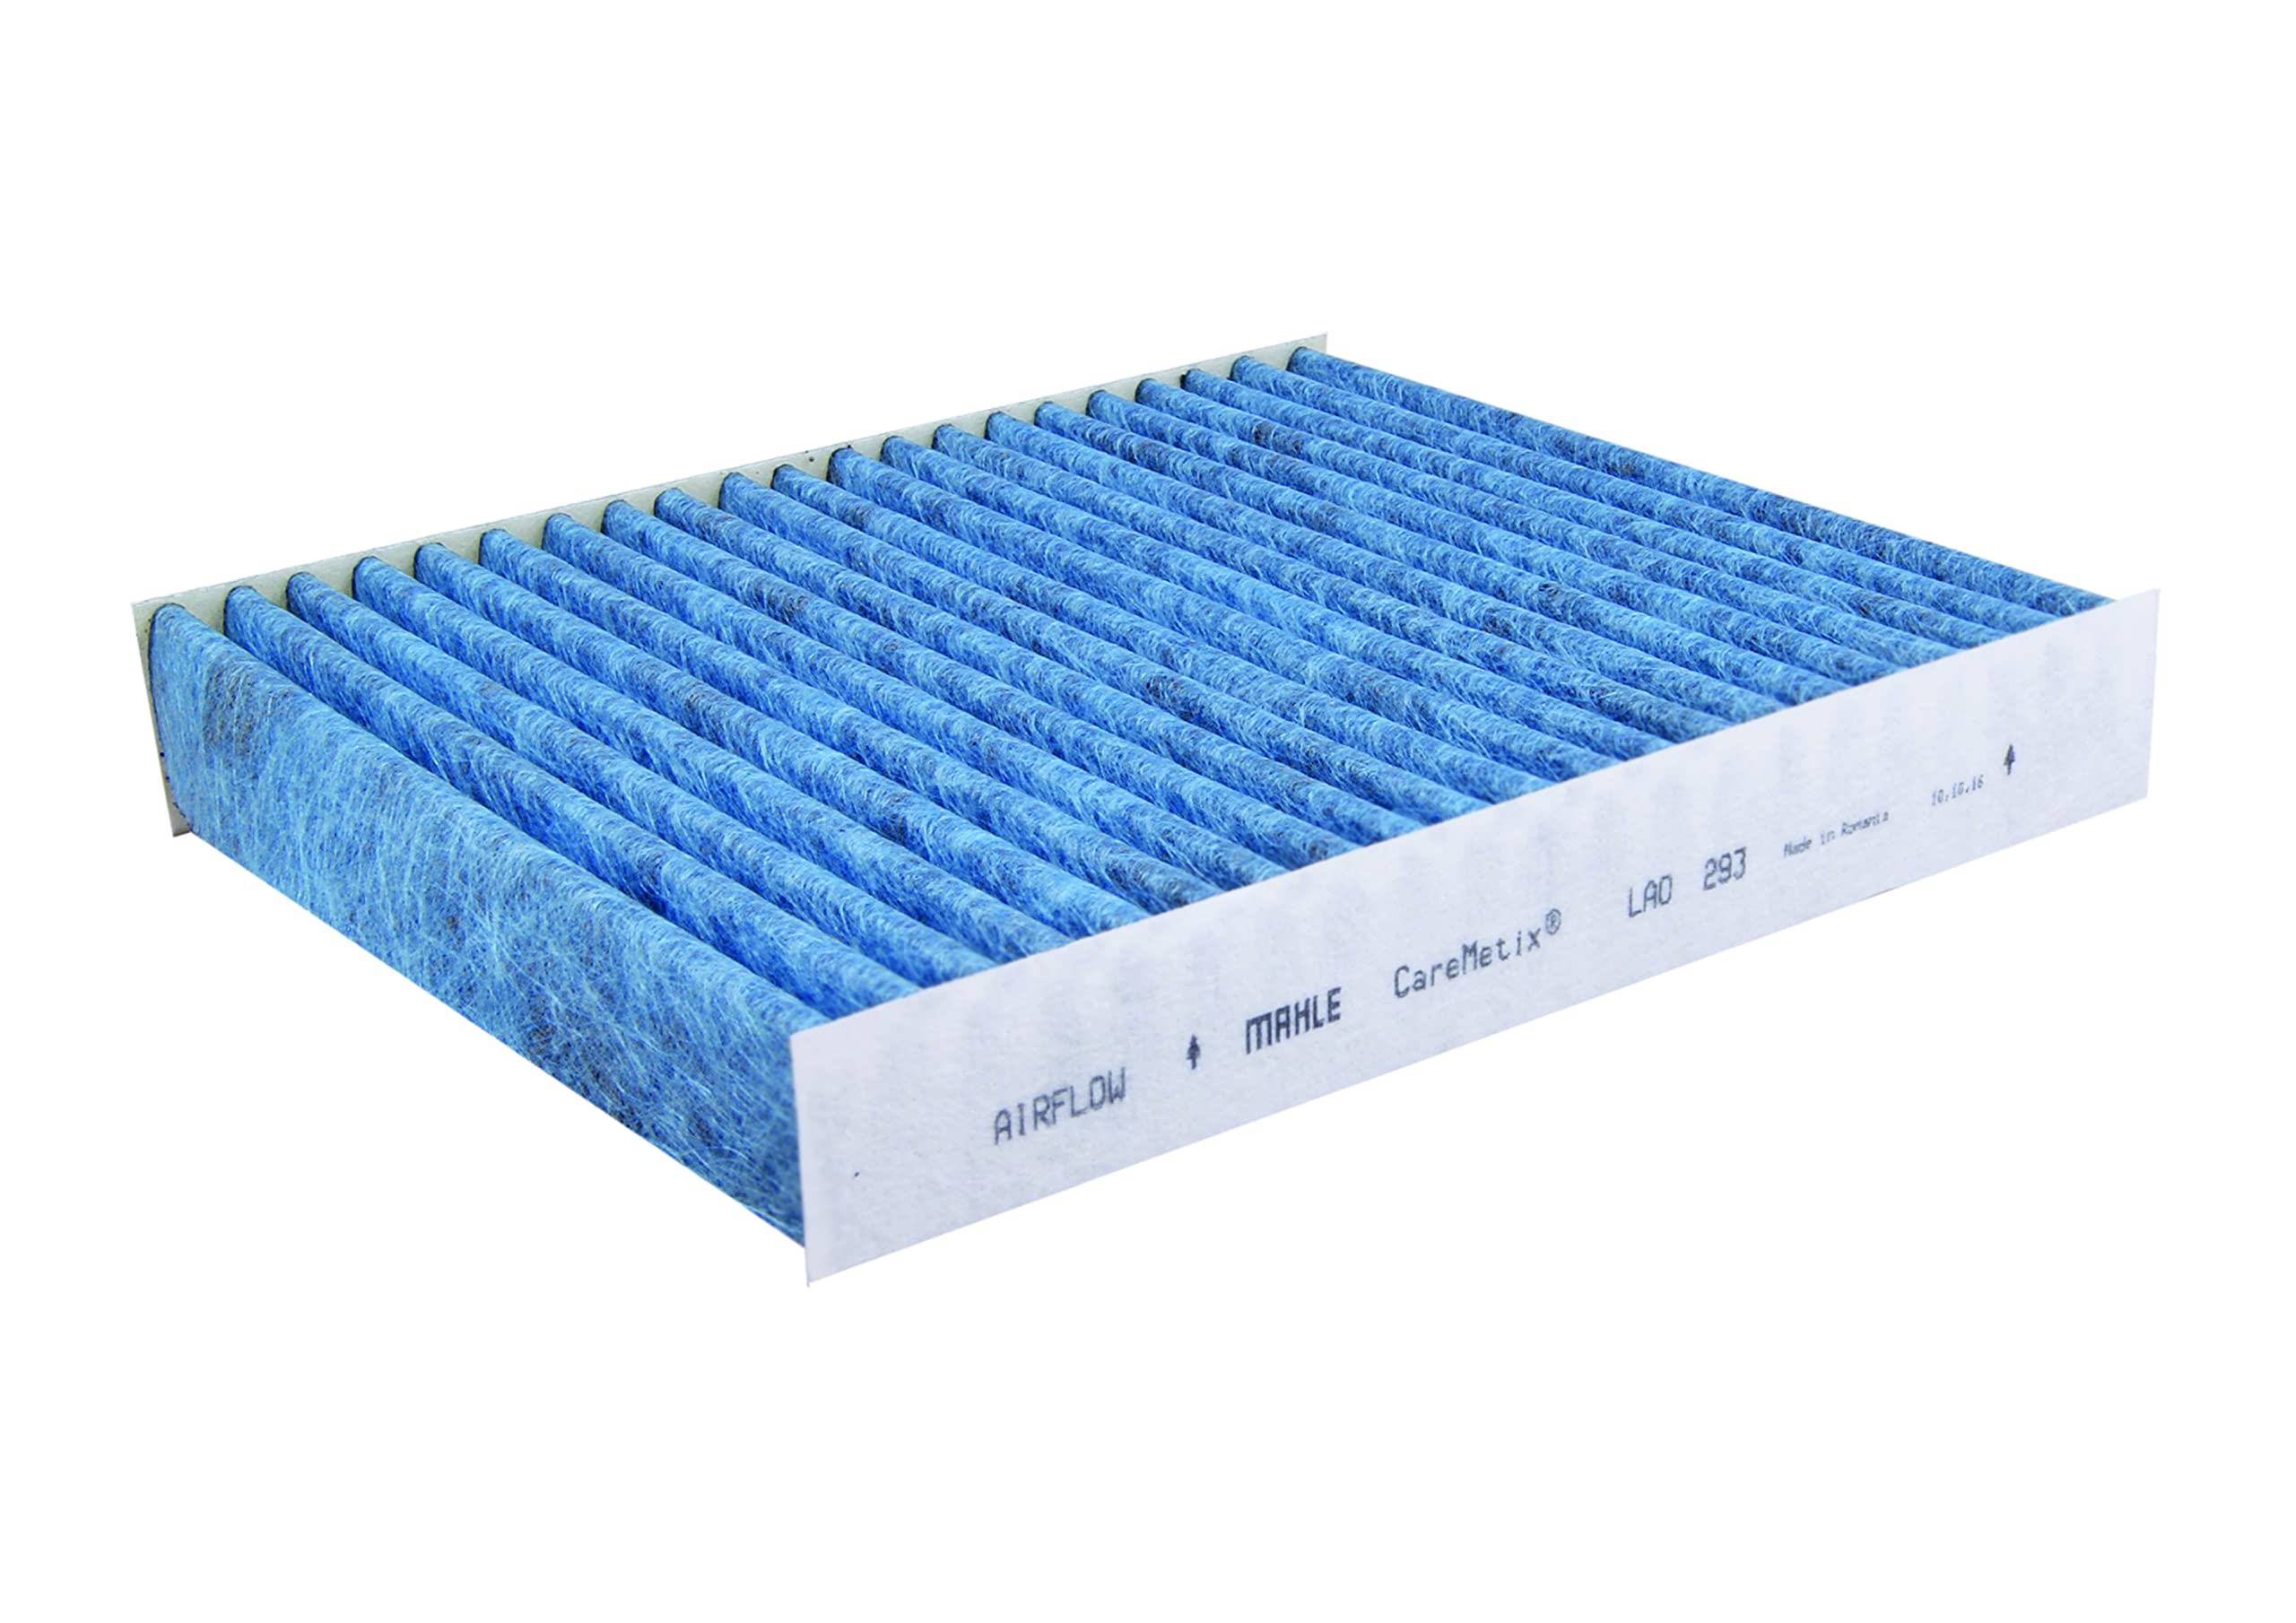 MAHLE Cabin Air Filter LAO 293